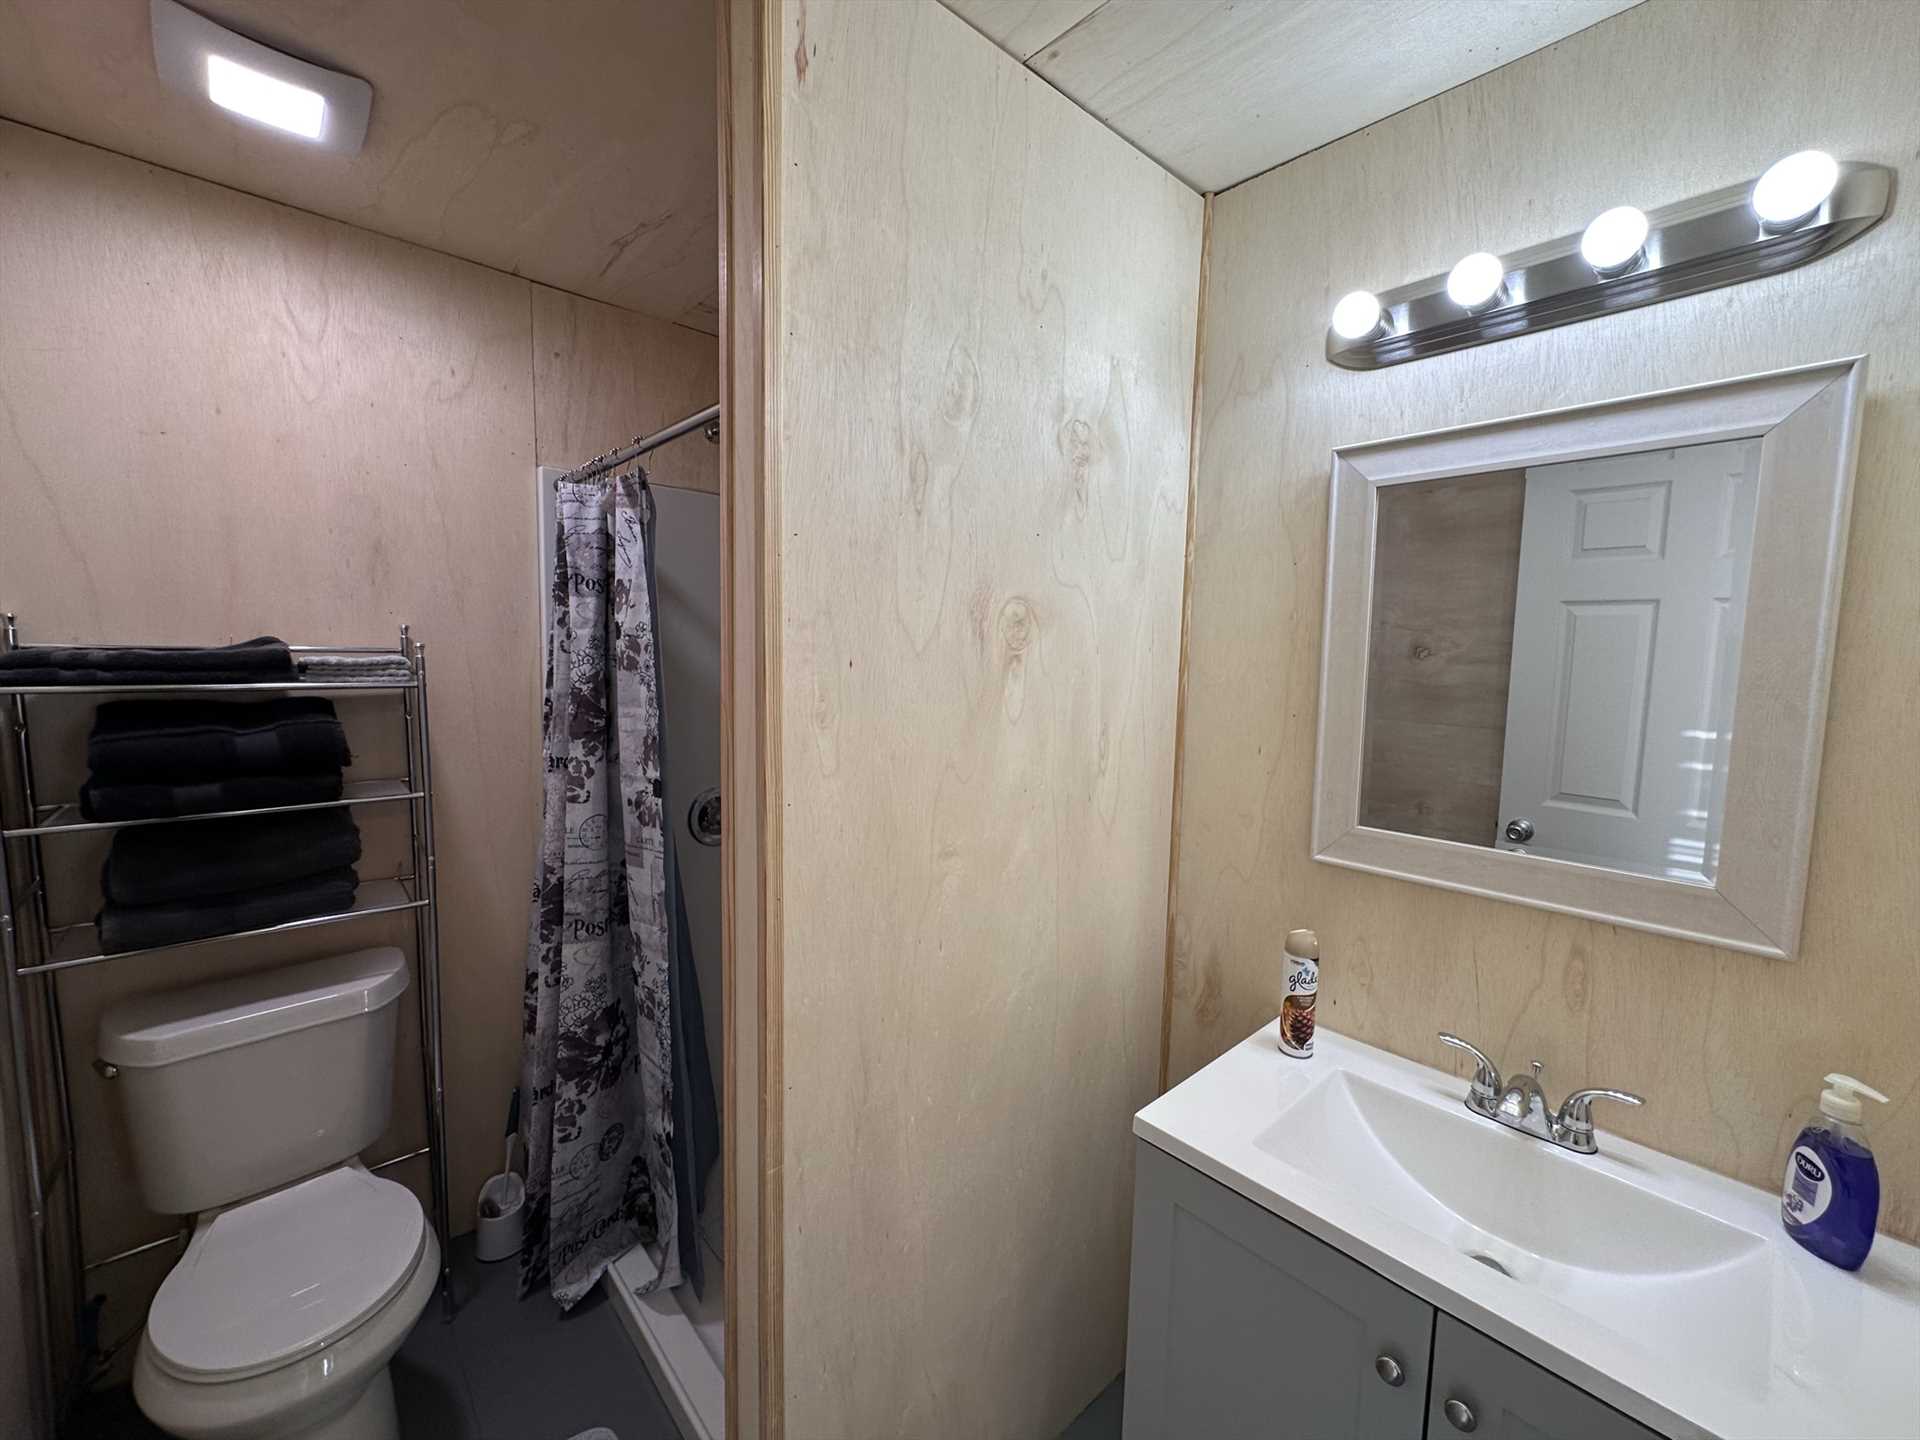                                                 A spotless single vanity and fresh linens are included in the full bath at the Wesley Cabin.